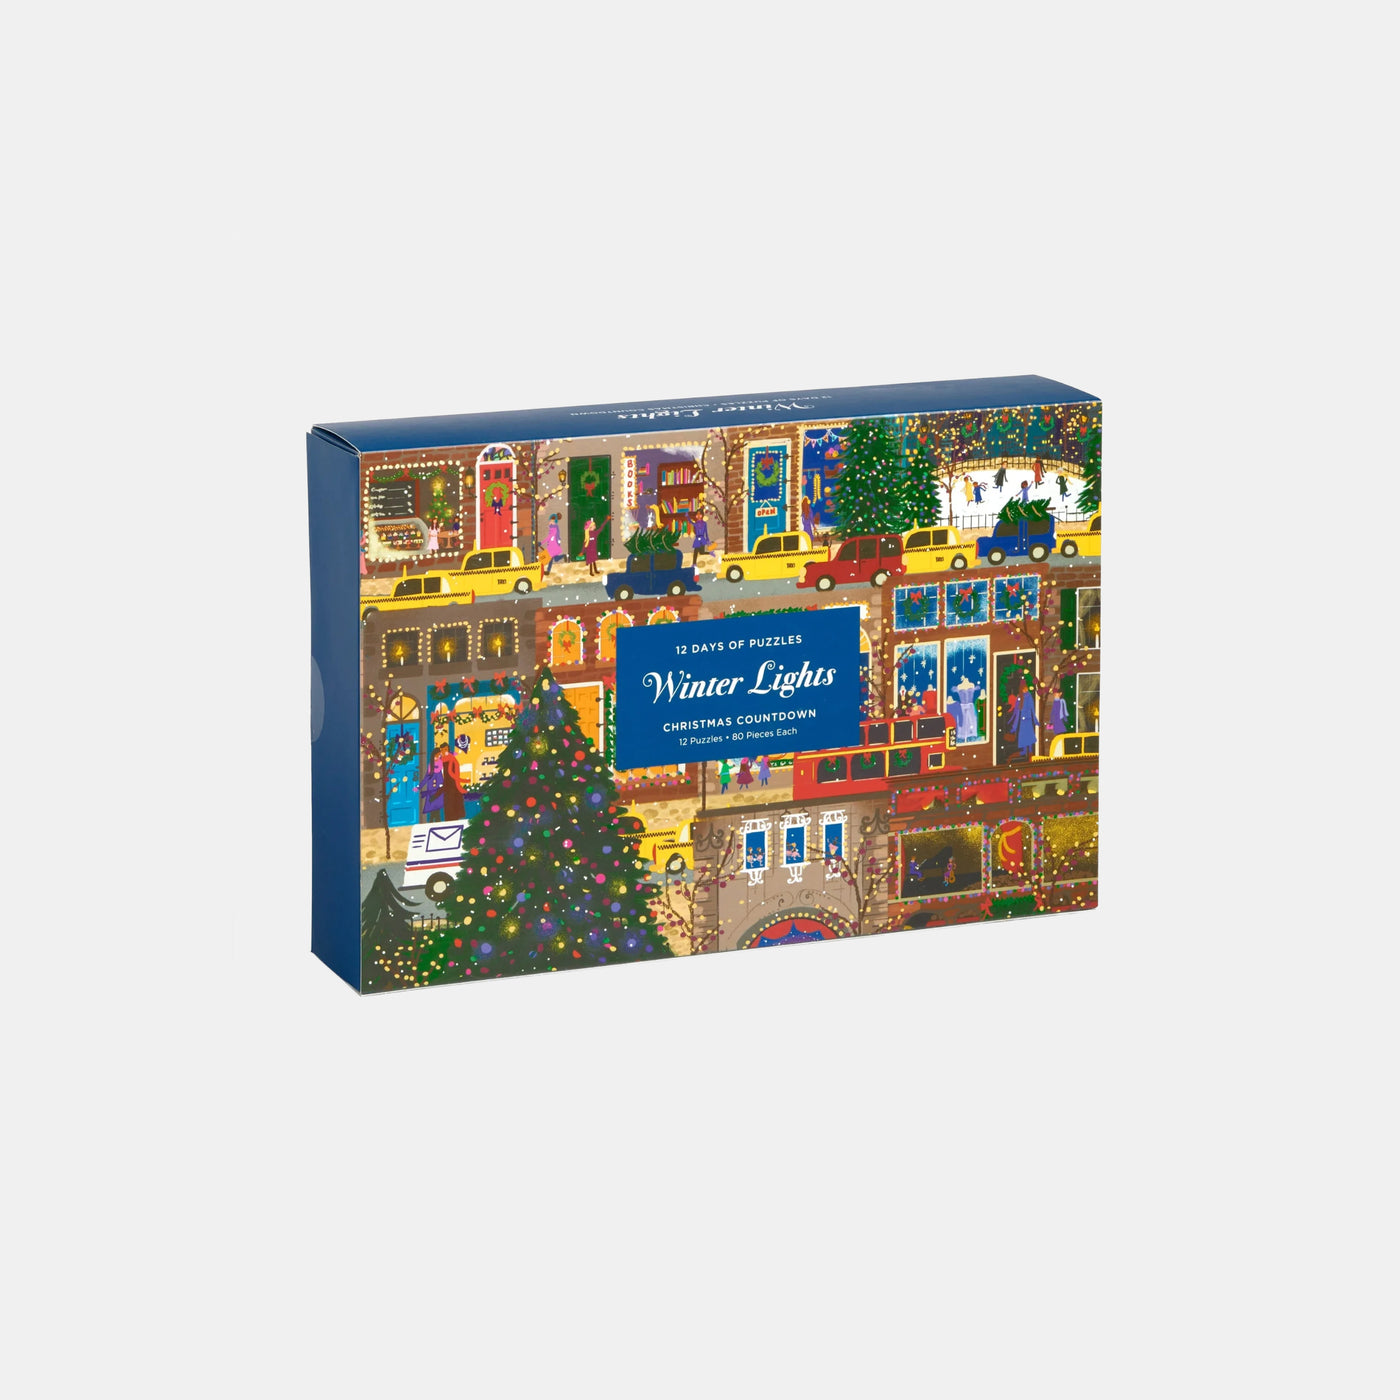 Joy Laforme Winter Lights 12 Days of Puzzles Christmas Countdown